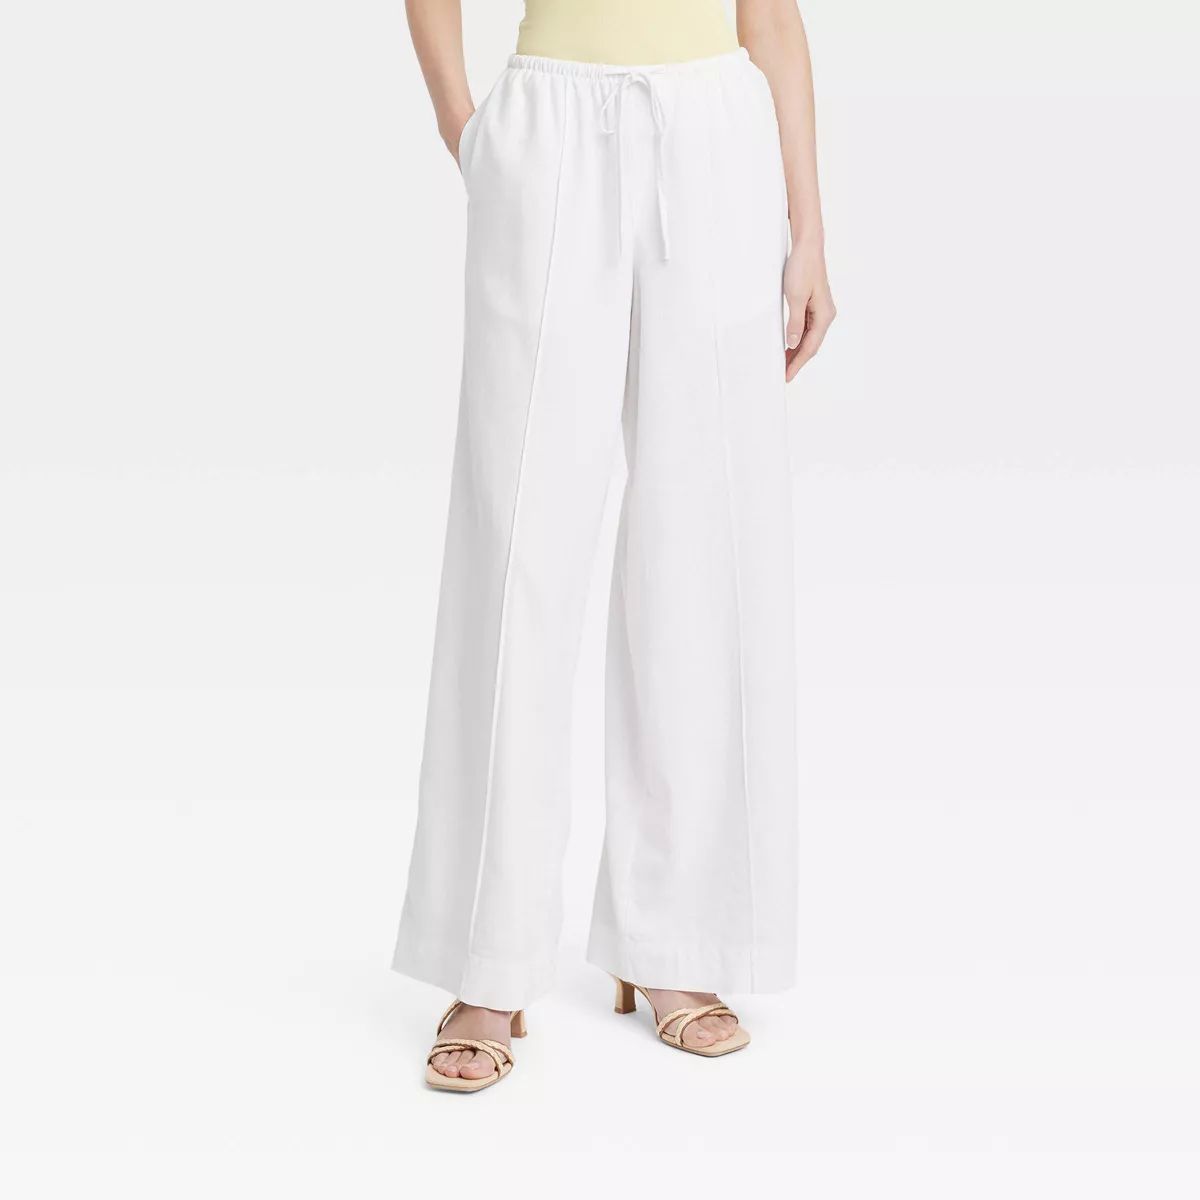 Women's High-Rise Wide Leg Linen Pull-On Pants - A New Day™ White L | Target